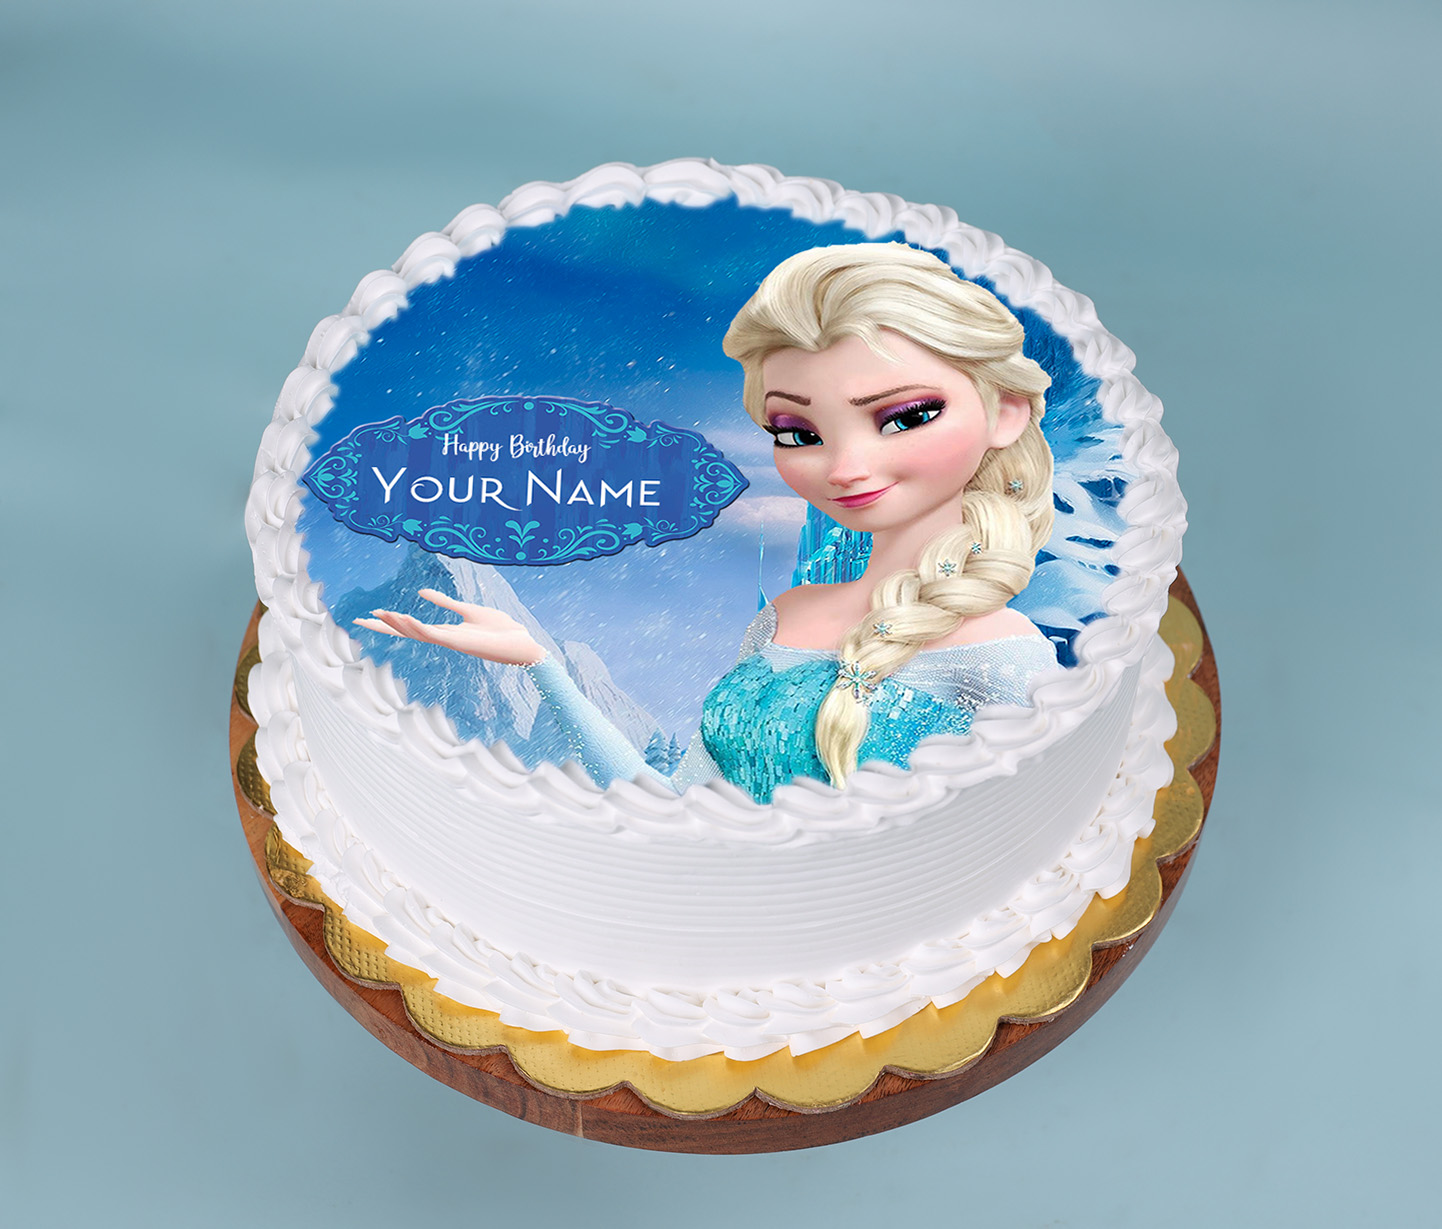 20 Gorgeous Cakes Inspired by The Movie 'Frozen' (PHOTOS) | CafeMom.com